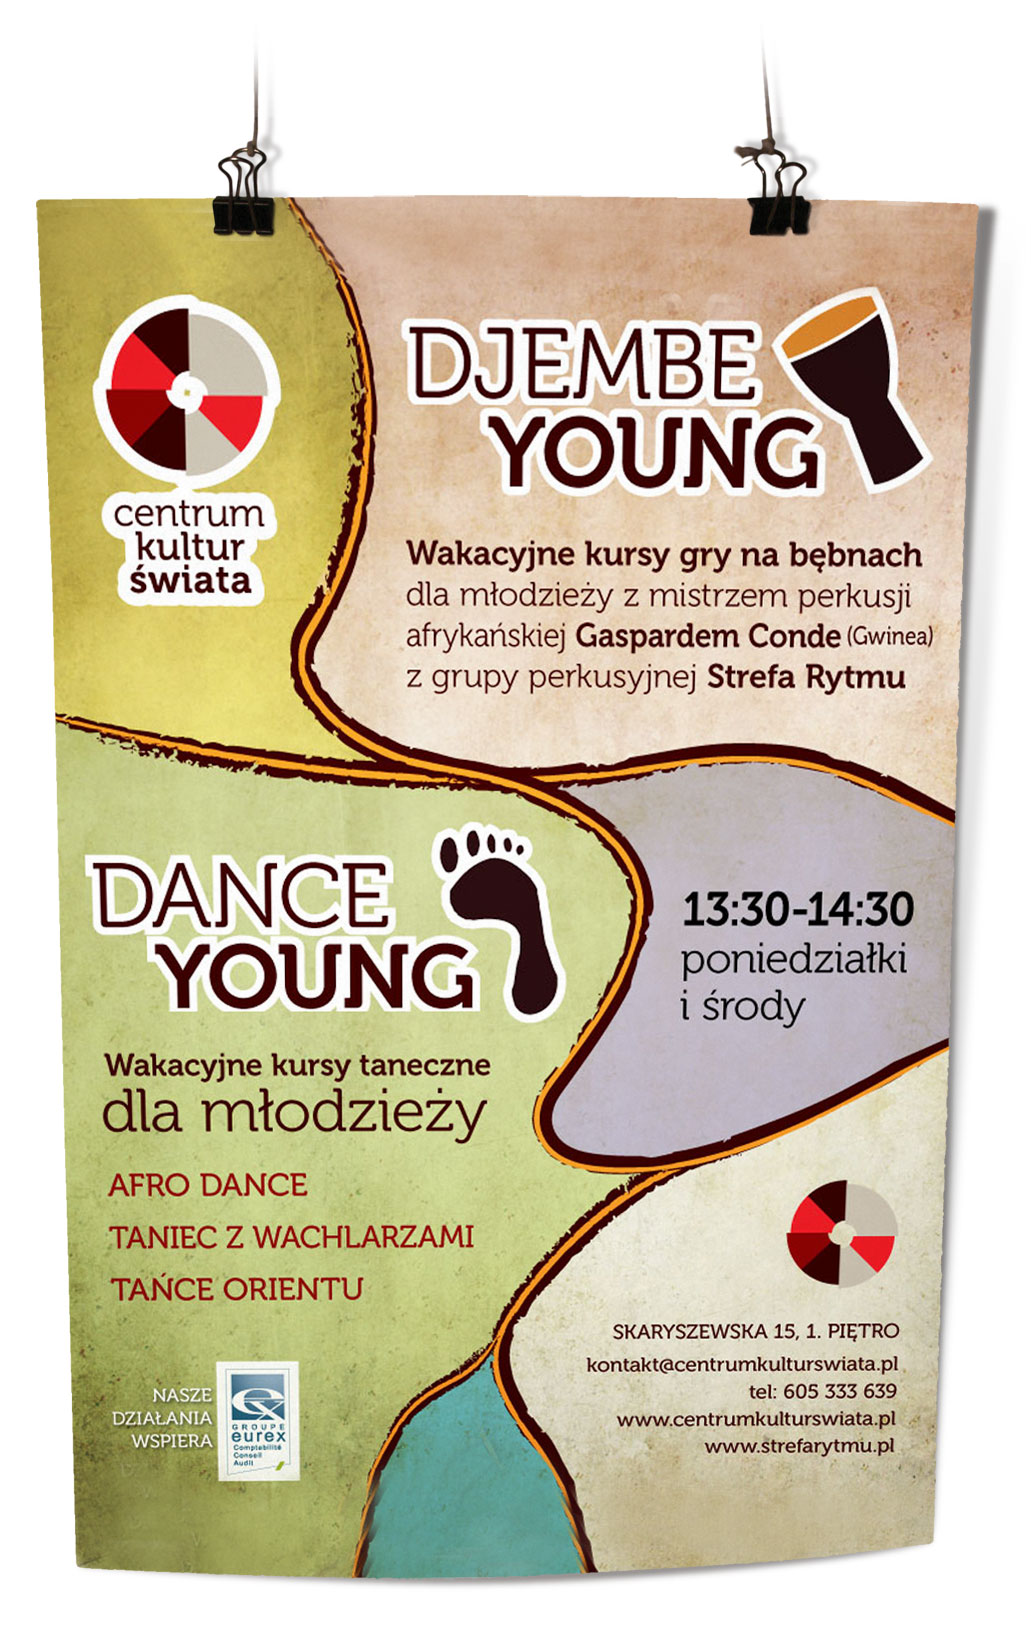 Djembe Young poster